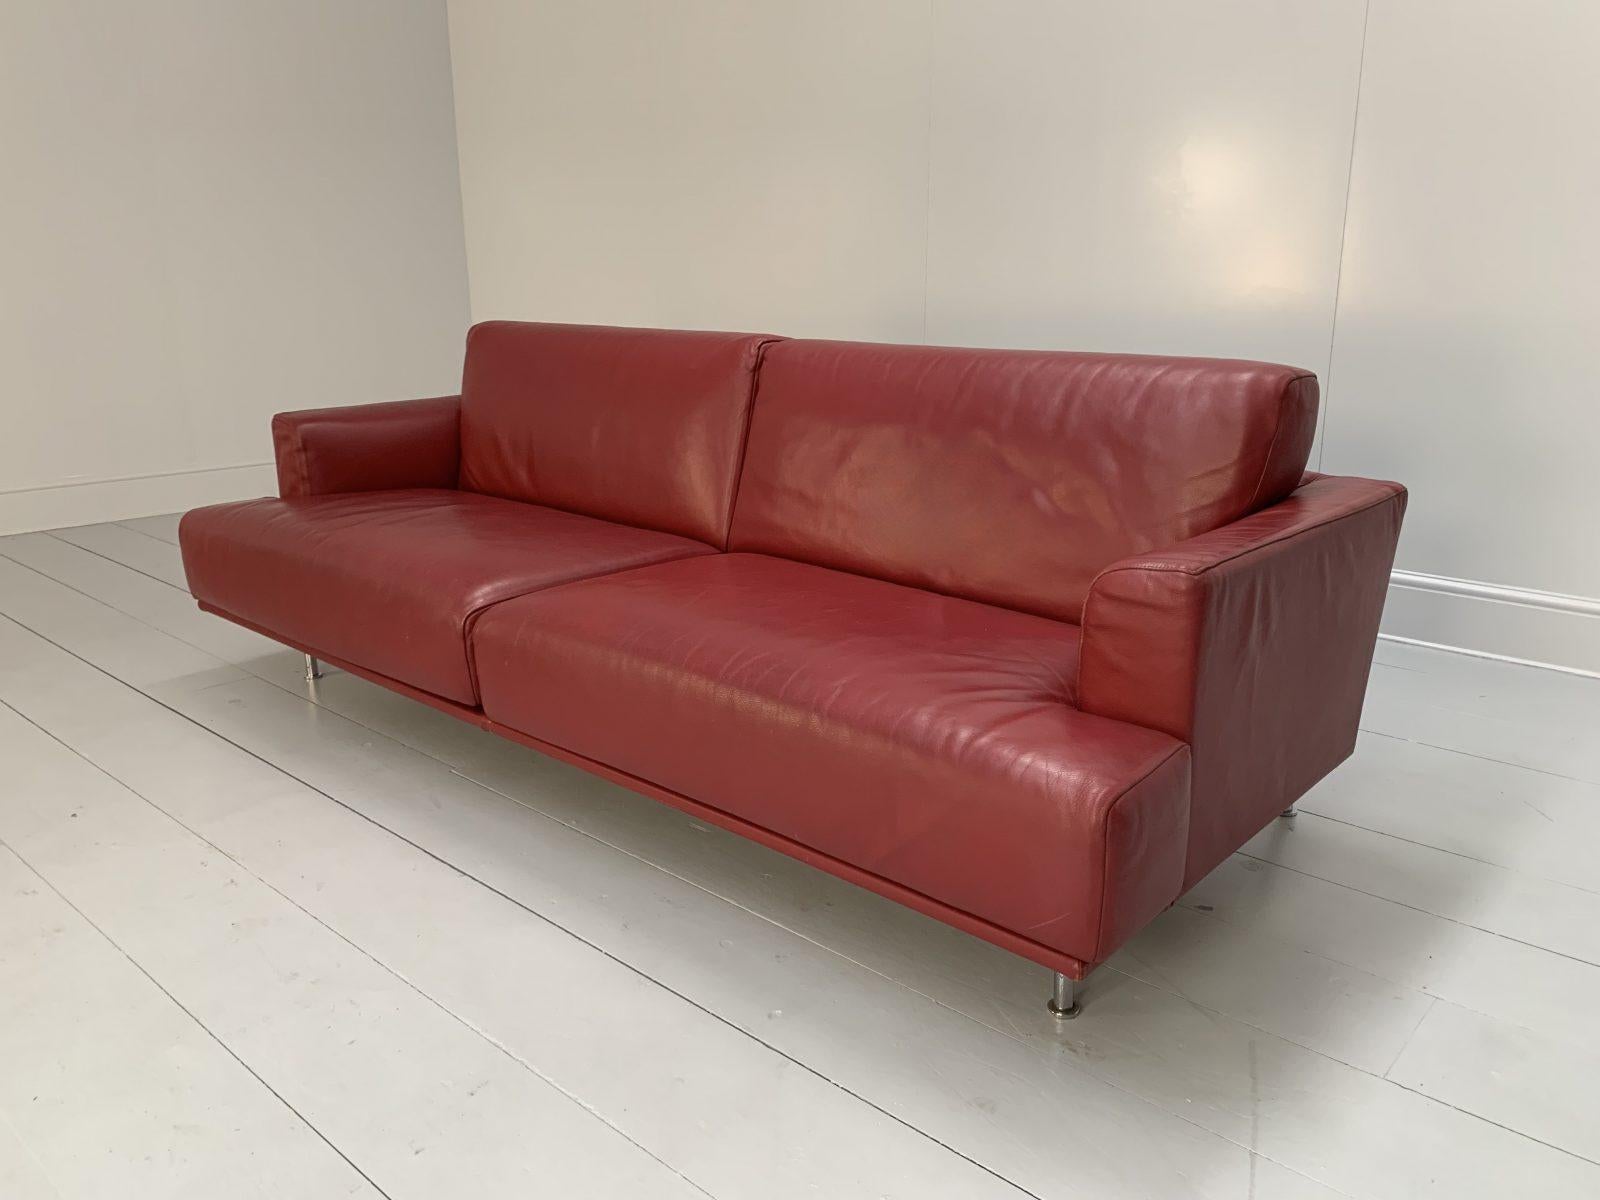 Cassina “253 Nest” 2.5-Seat Sofa & Bench Footstool – In Red “Pelle” Leather 4